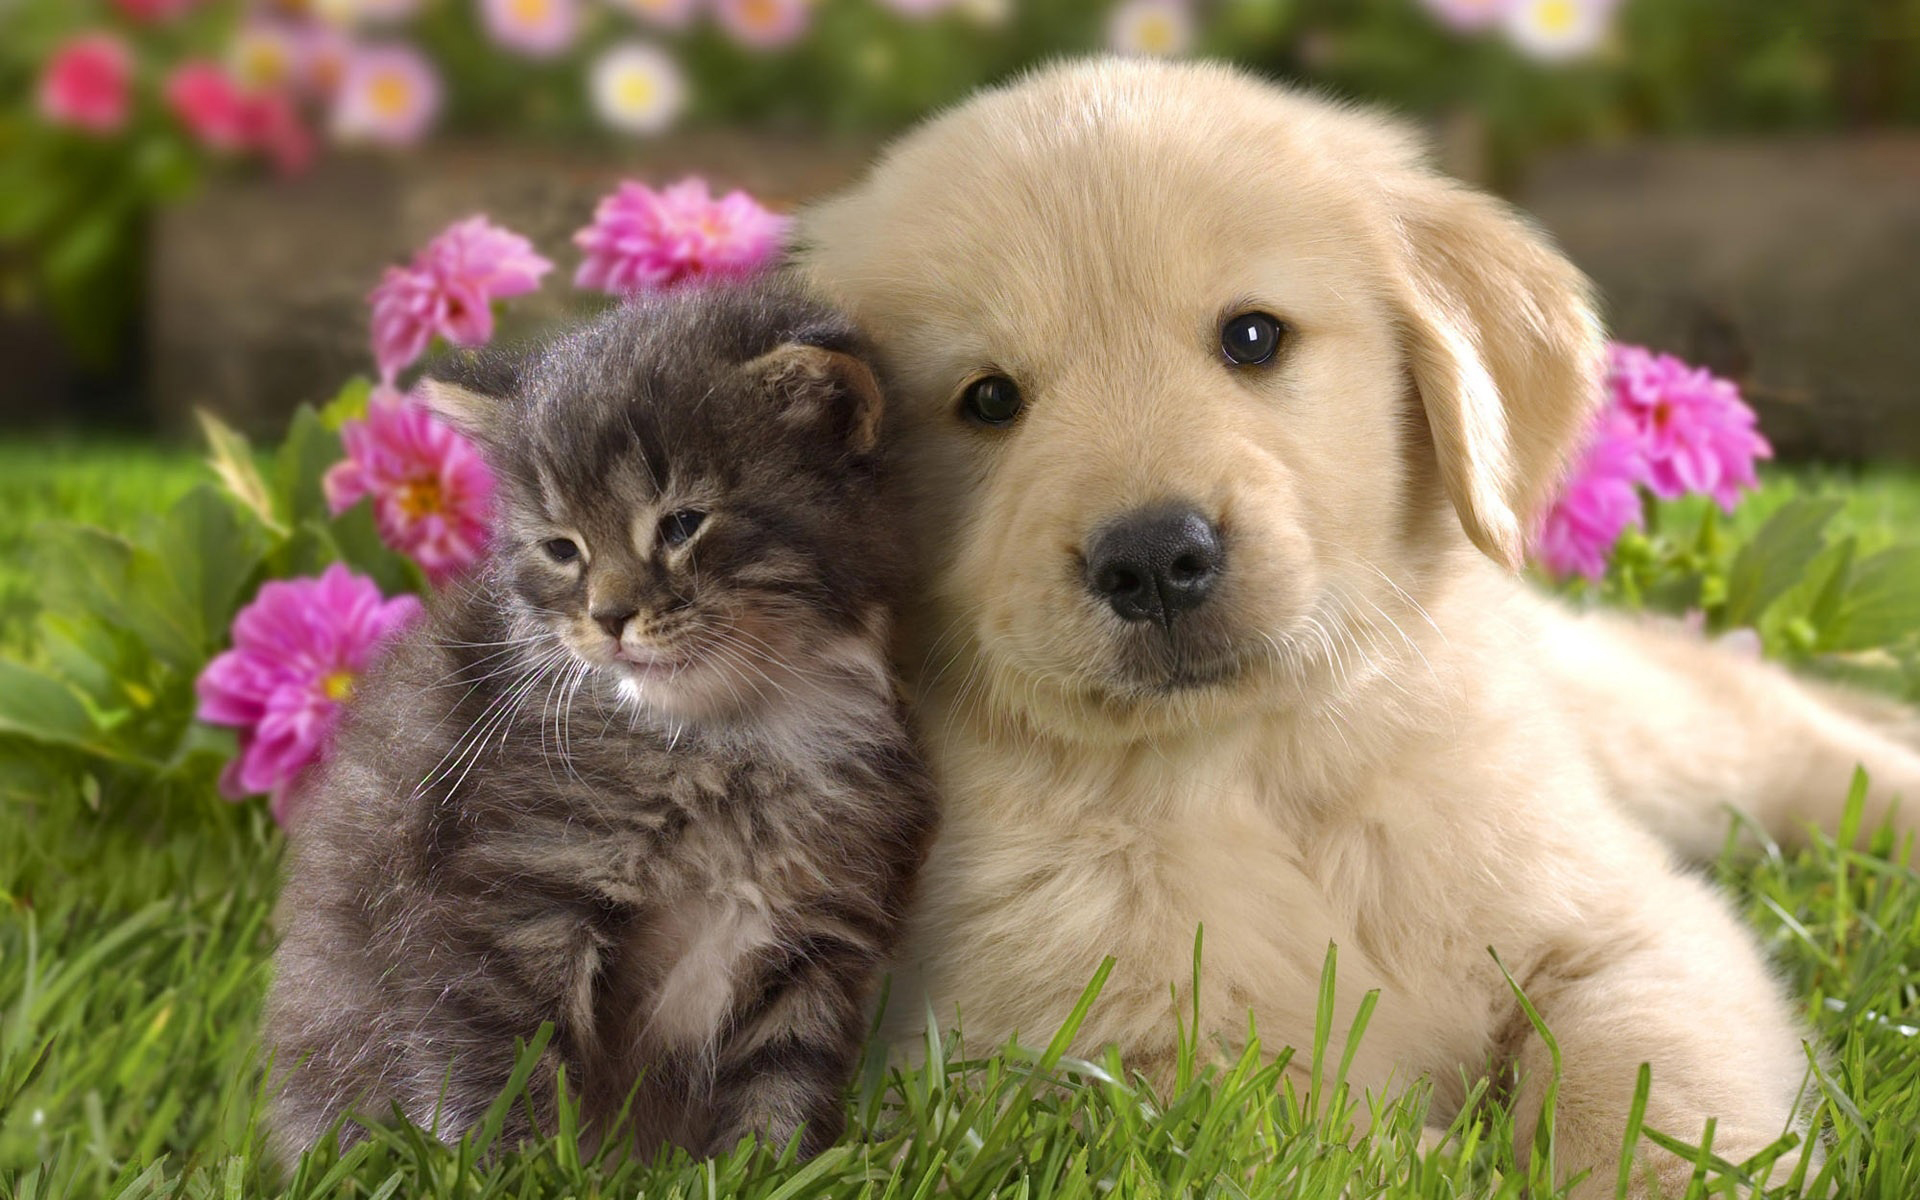 Kitten With A Puppy   Best Animal Wallpapers 1920x1200